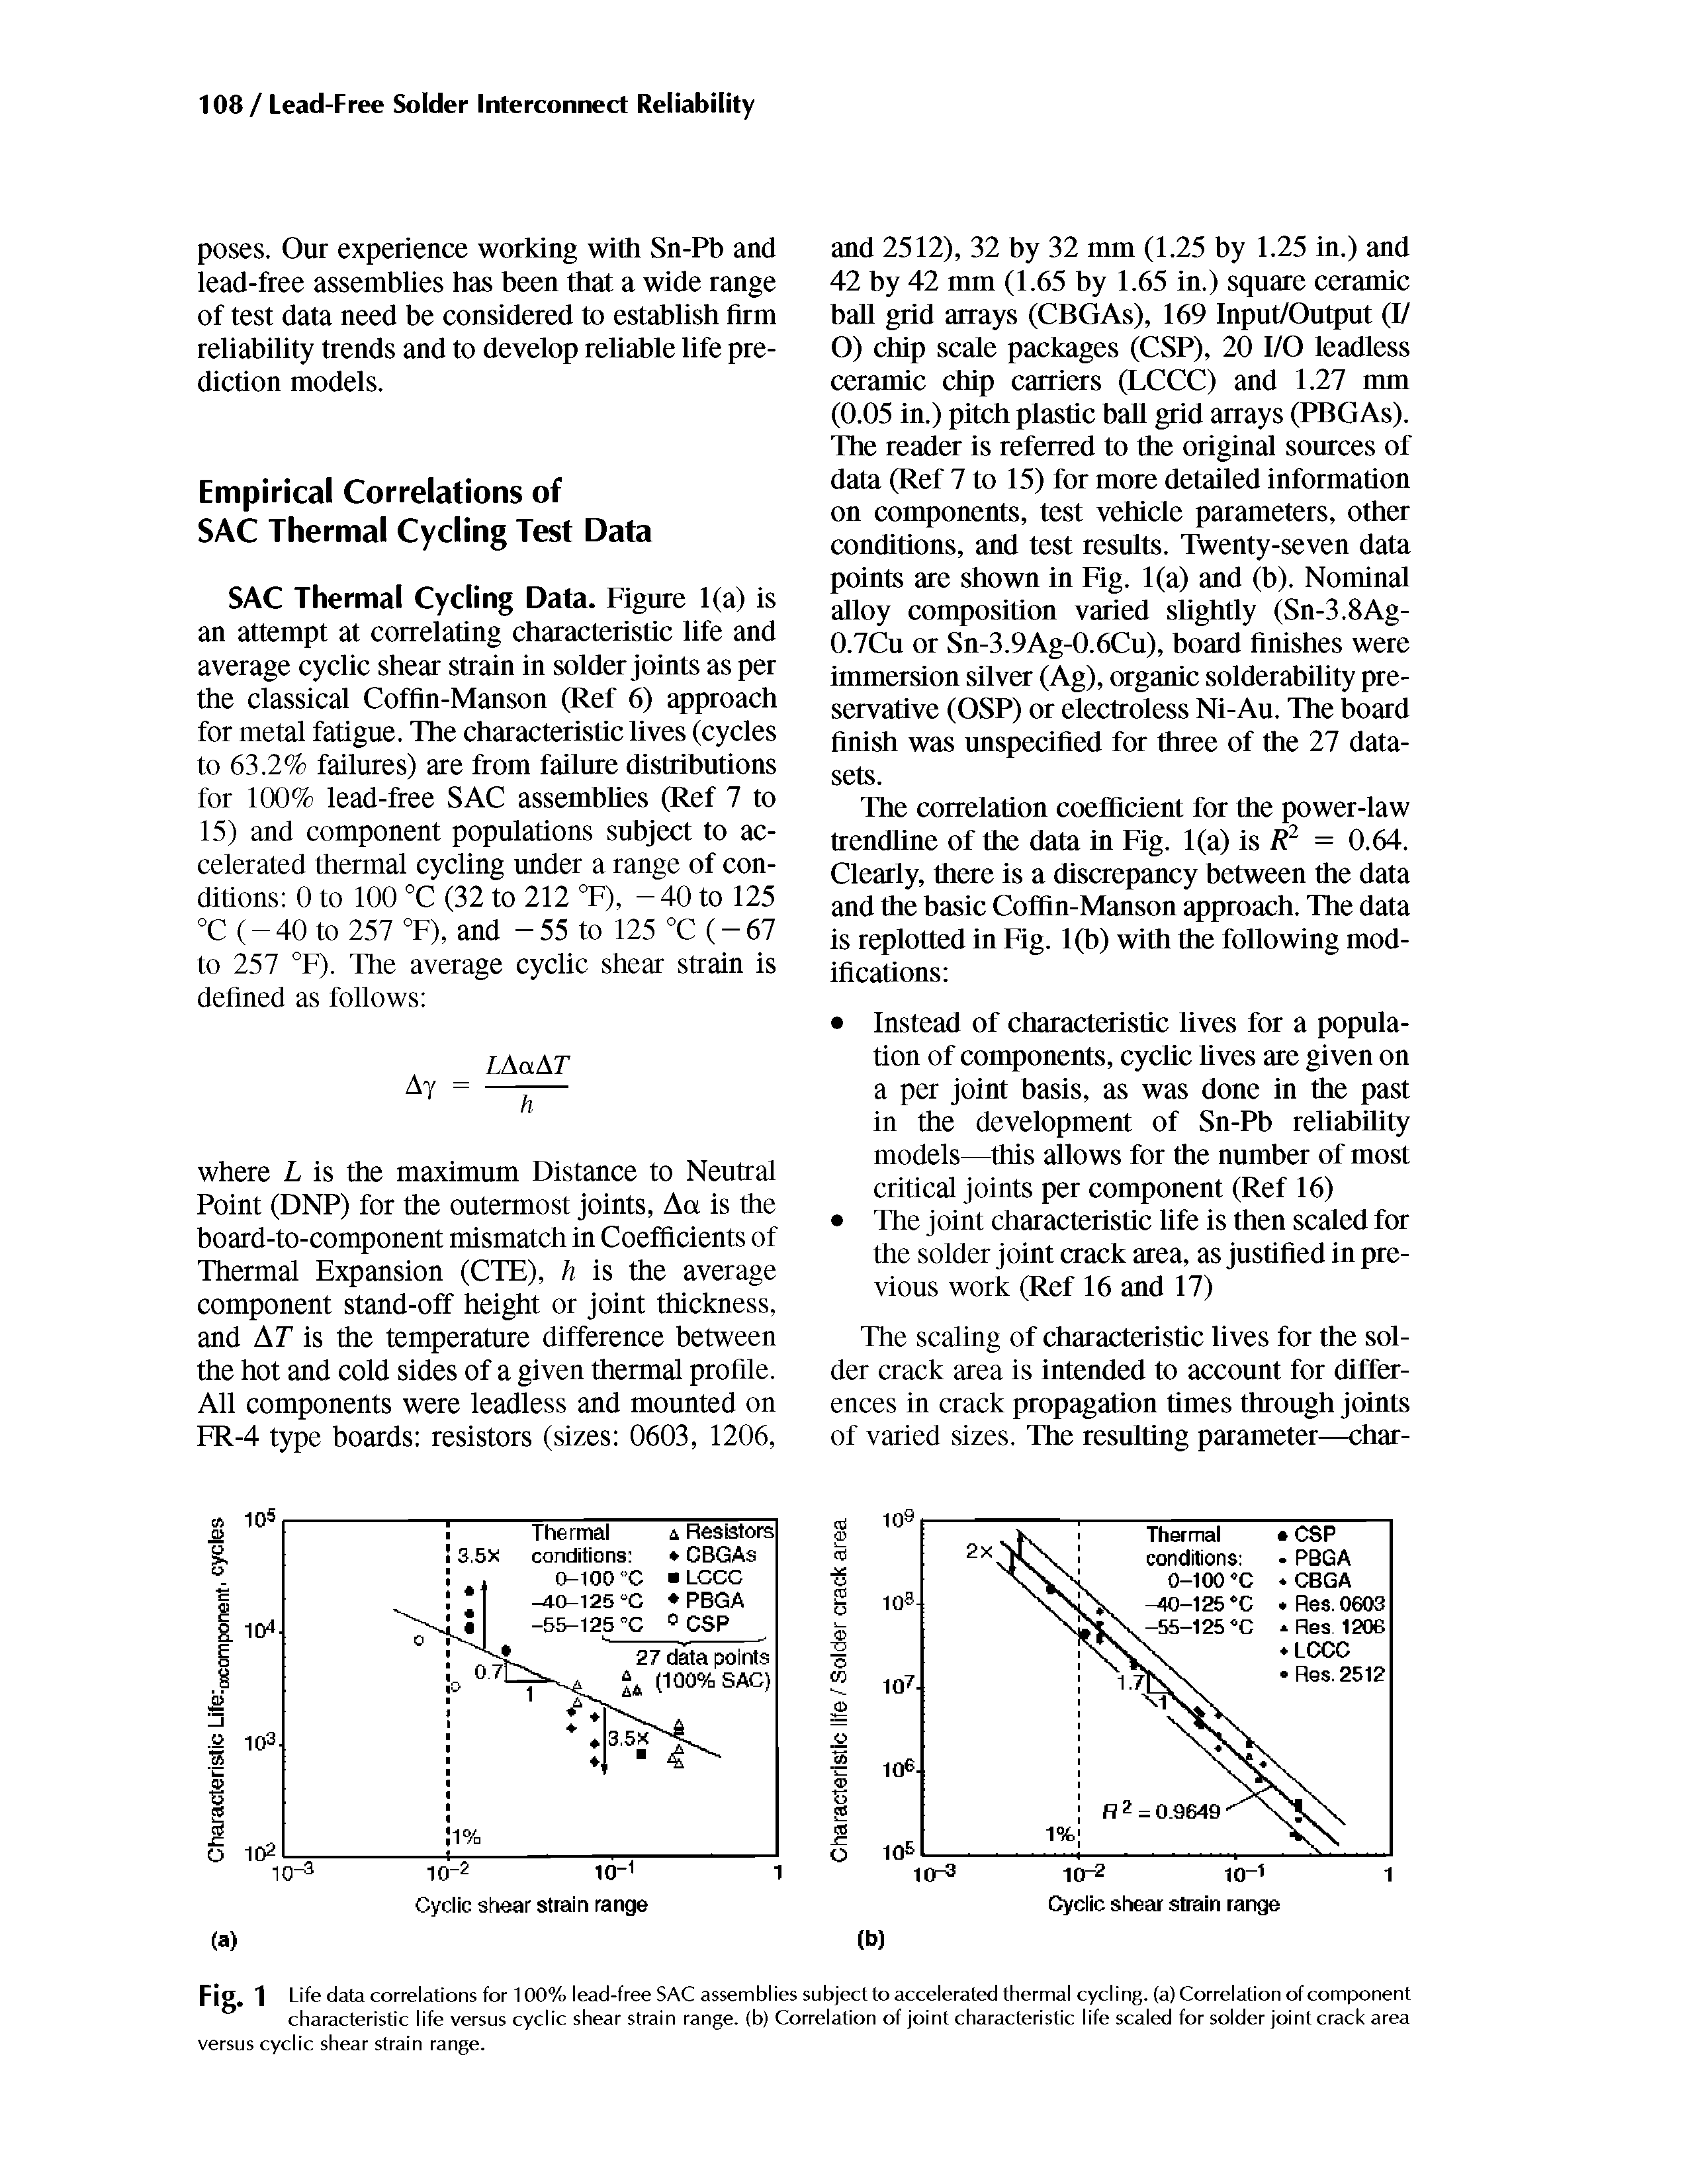 Fig. 1 Life data correlations for 100% lead-free SAC assemblies subject to accelerated thermal cycling, (a) Correlation of component characteristic life versus cyclic shear strain range, (b) Correlation of joint characteristic life scaled for solder joint crack area versus cyclic shear strain range.